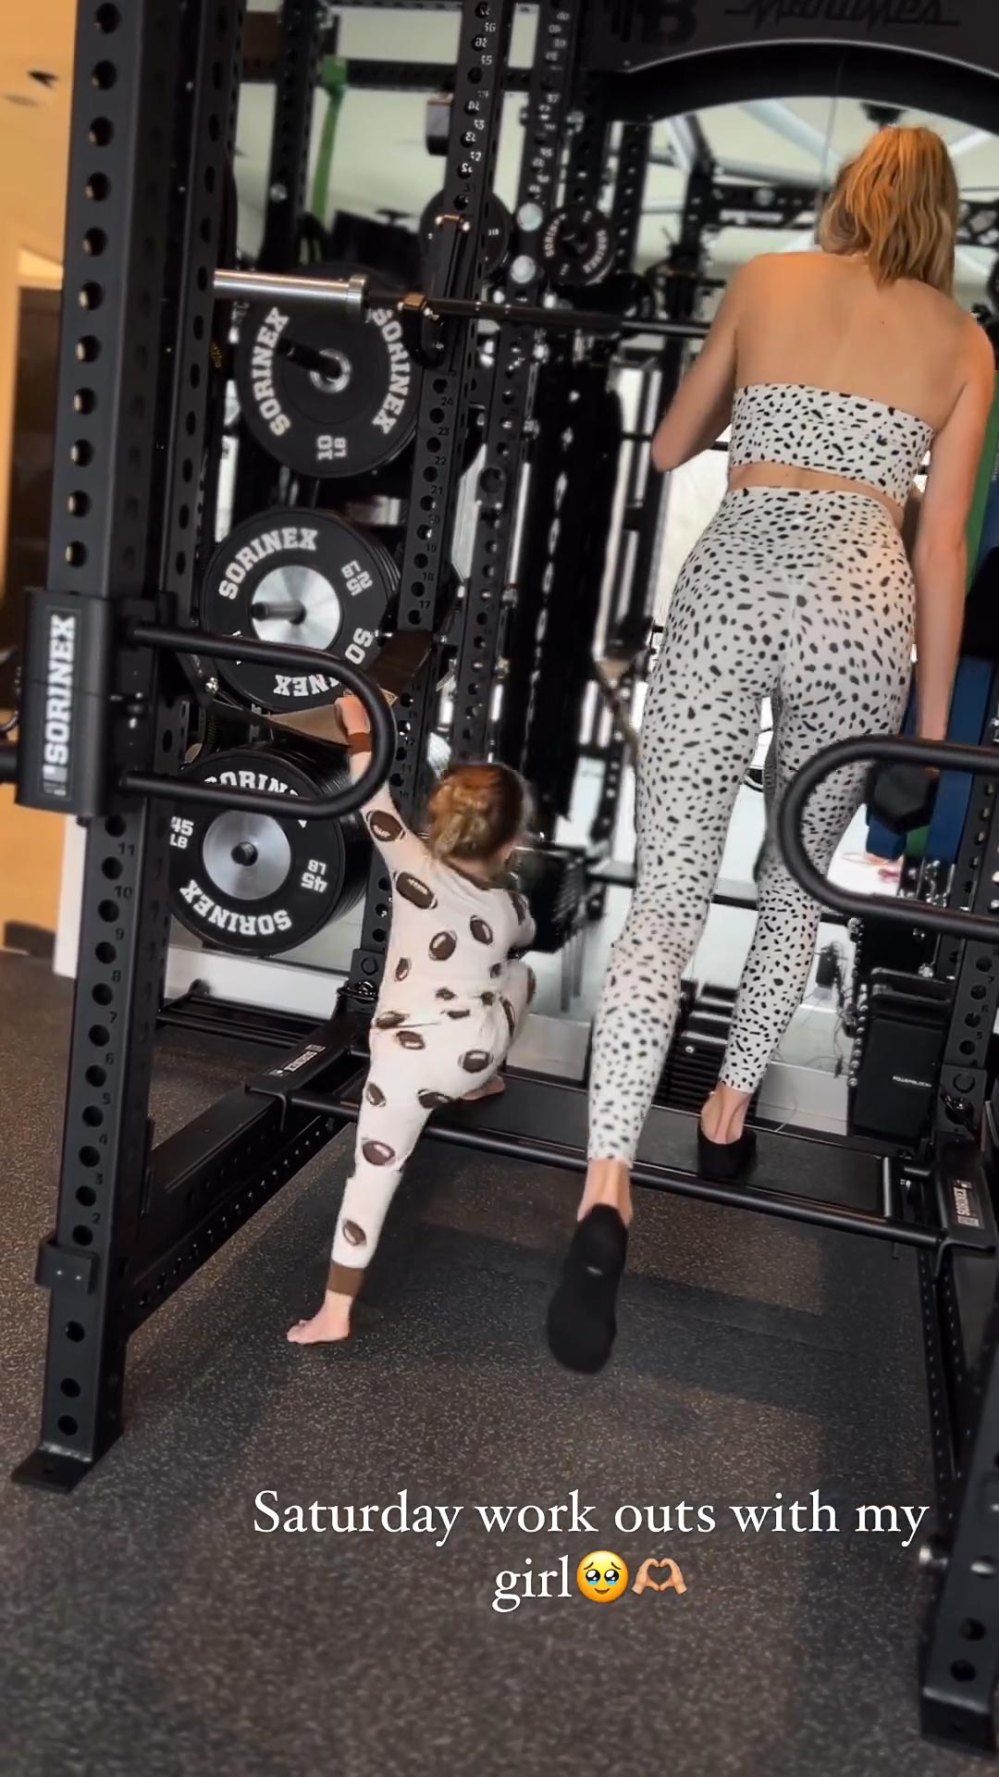 Brittany Mahomes Shares Sweet Workout Video With Daughter Sterling My Girl 724